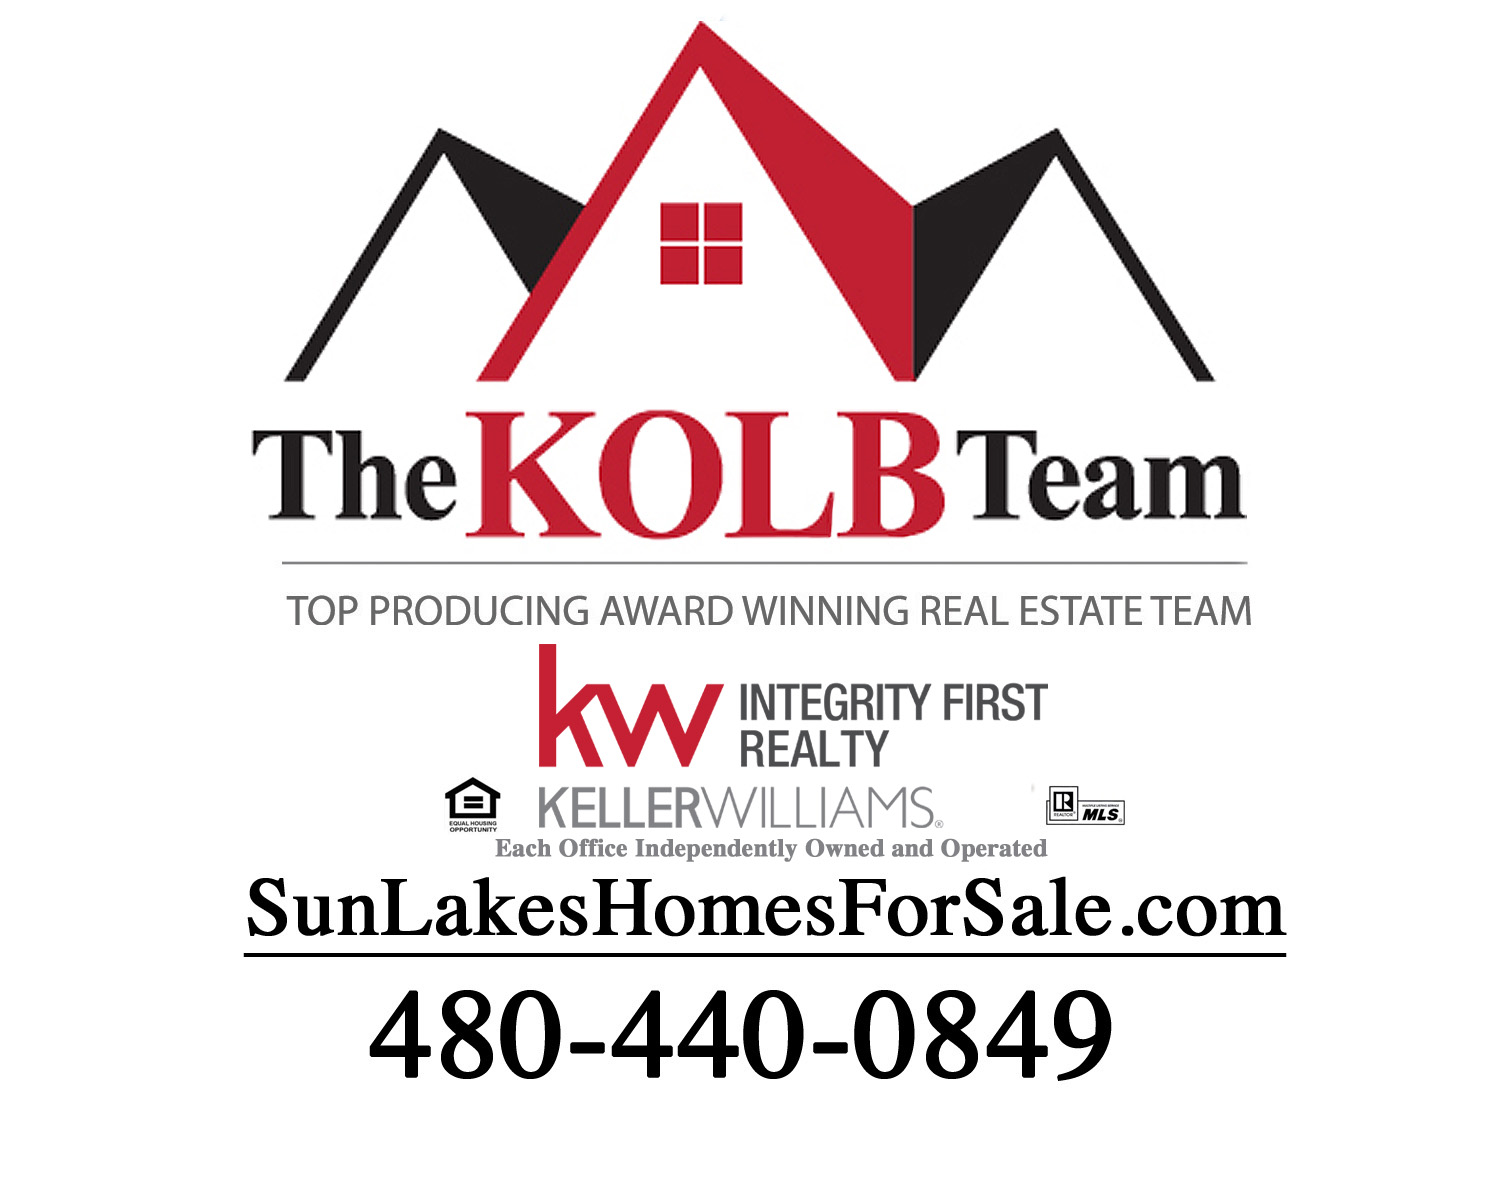 Visit www.thekolbteam.com to find your dream home in Arizona today!